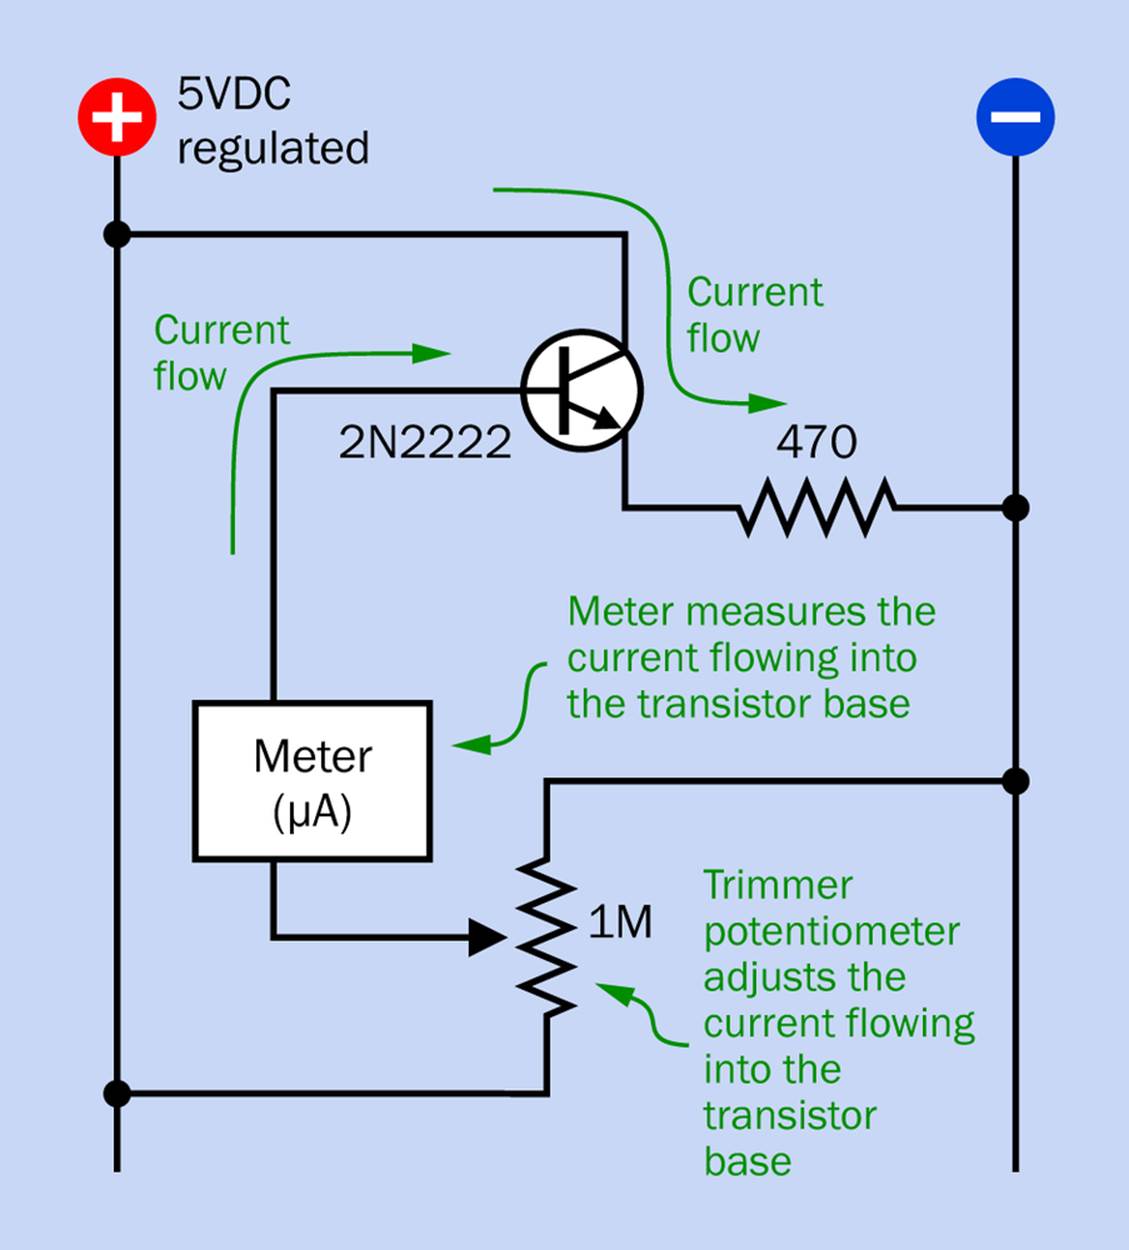 The meter measures current flowing into the base of the transistor.